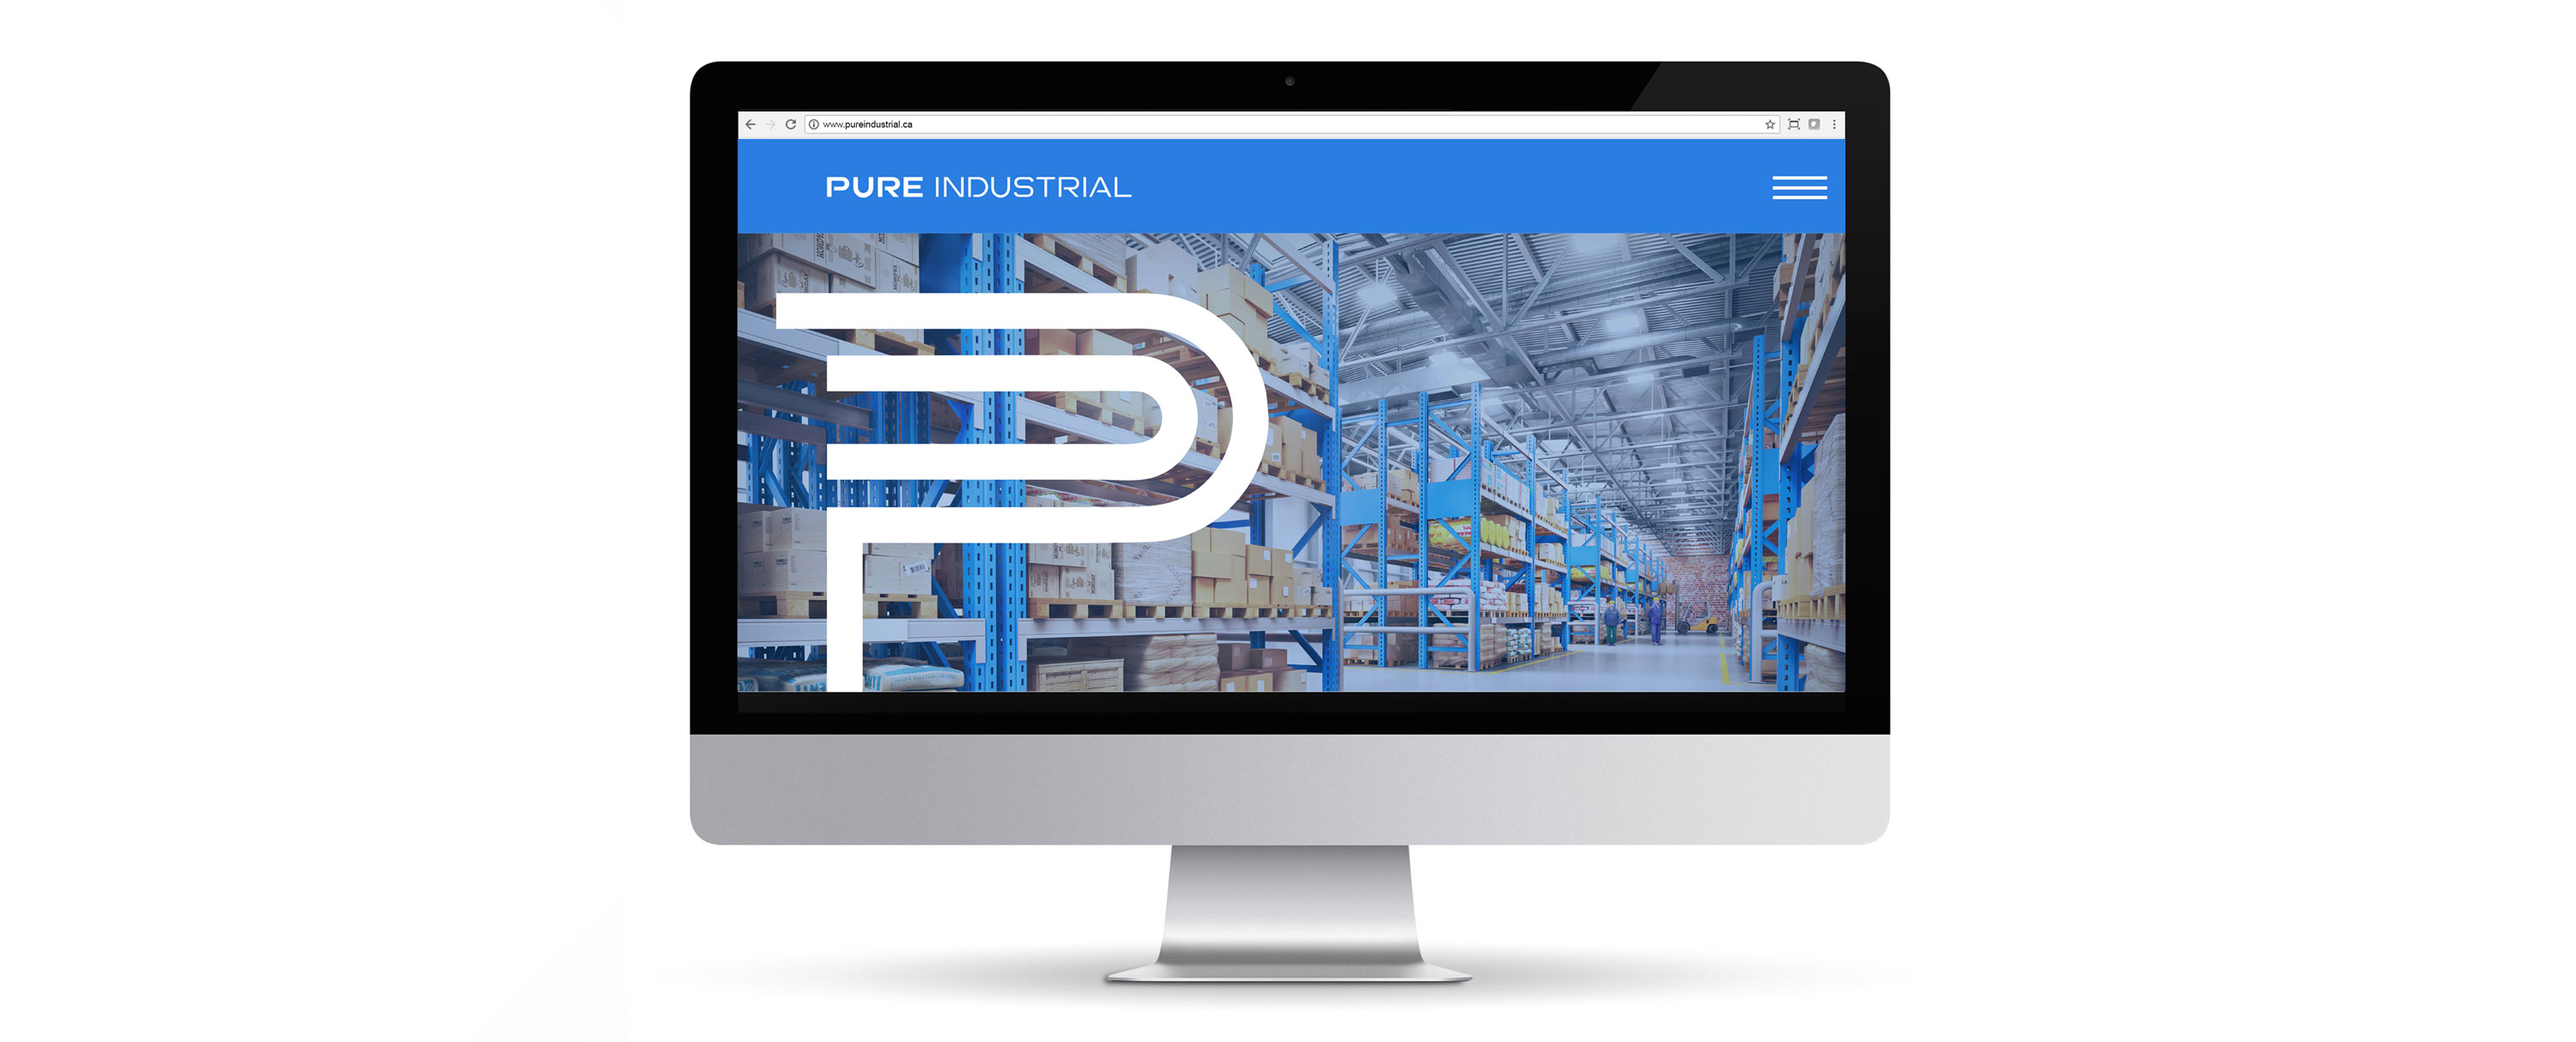 Website layout shown on computer, large white custom P over a industrial warehouse photo